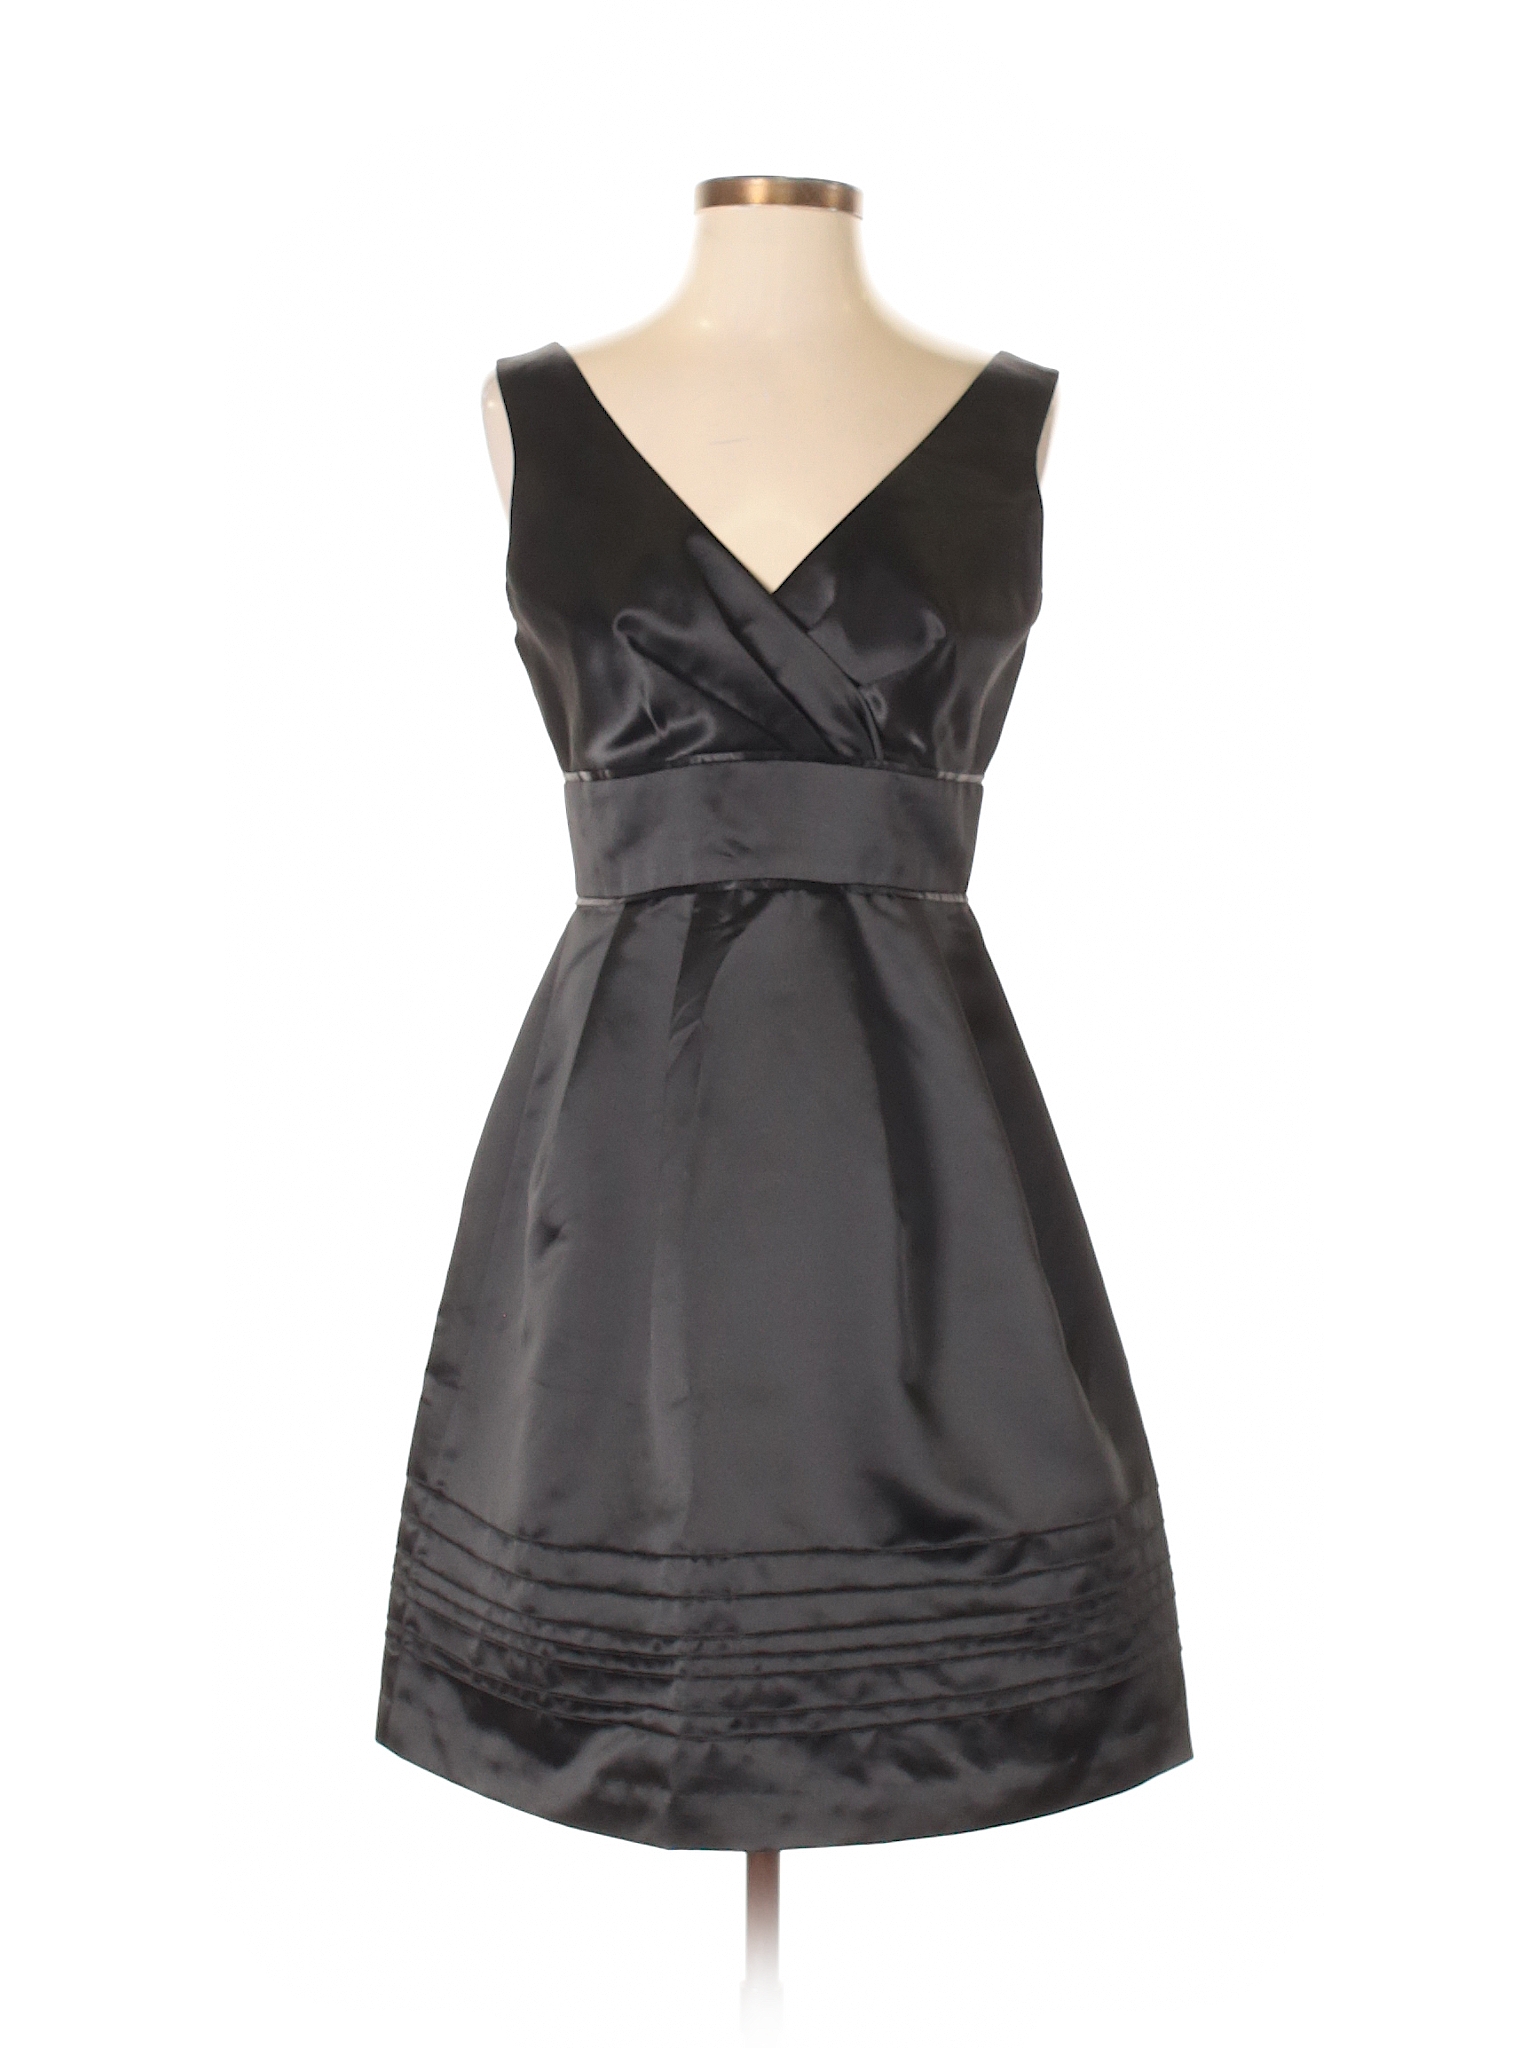 Max and Cleo 100% Polyester Metallic Black Cocktail Dress Size 4 - 96% ...